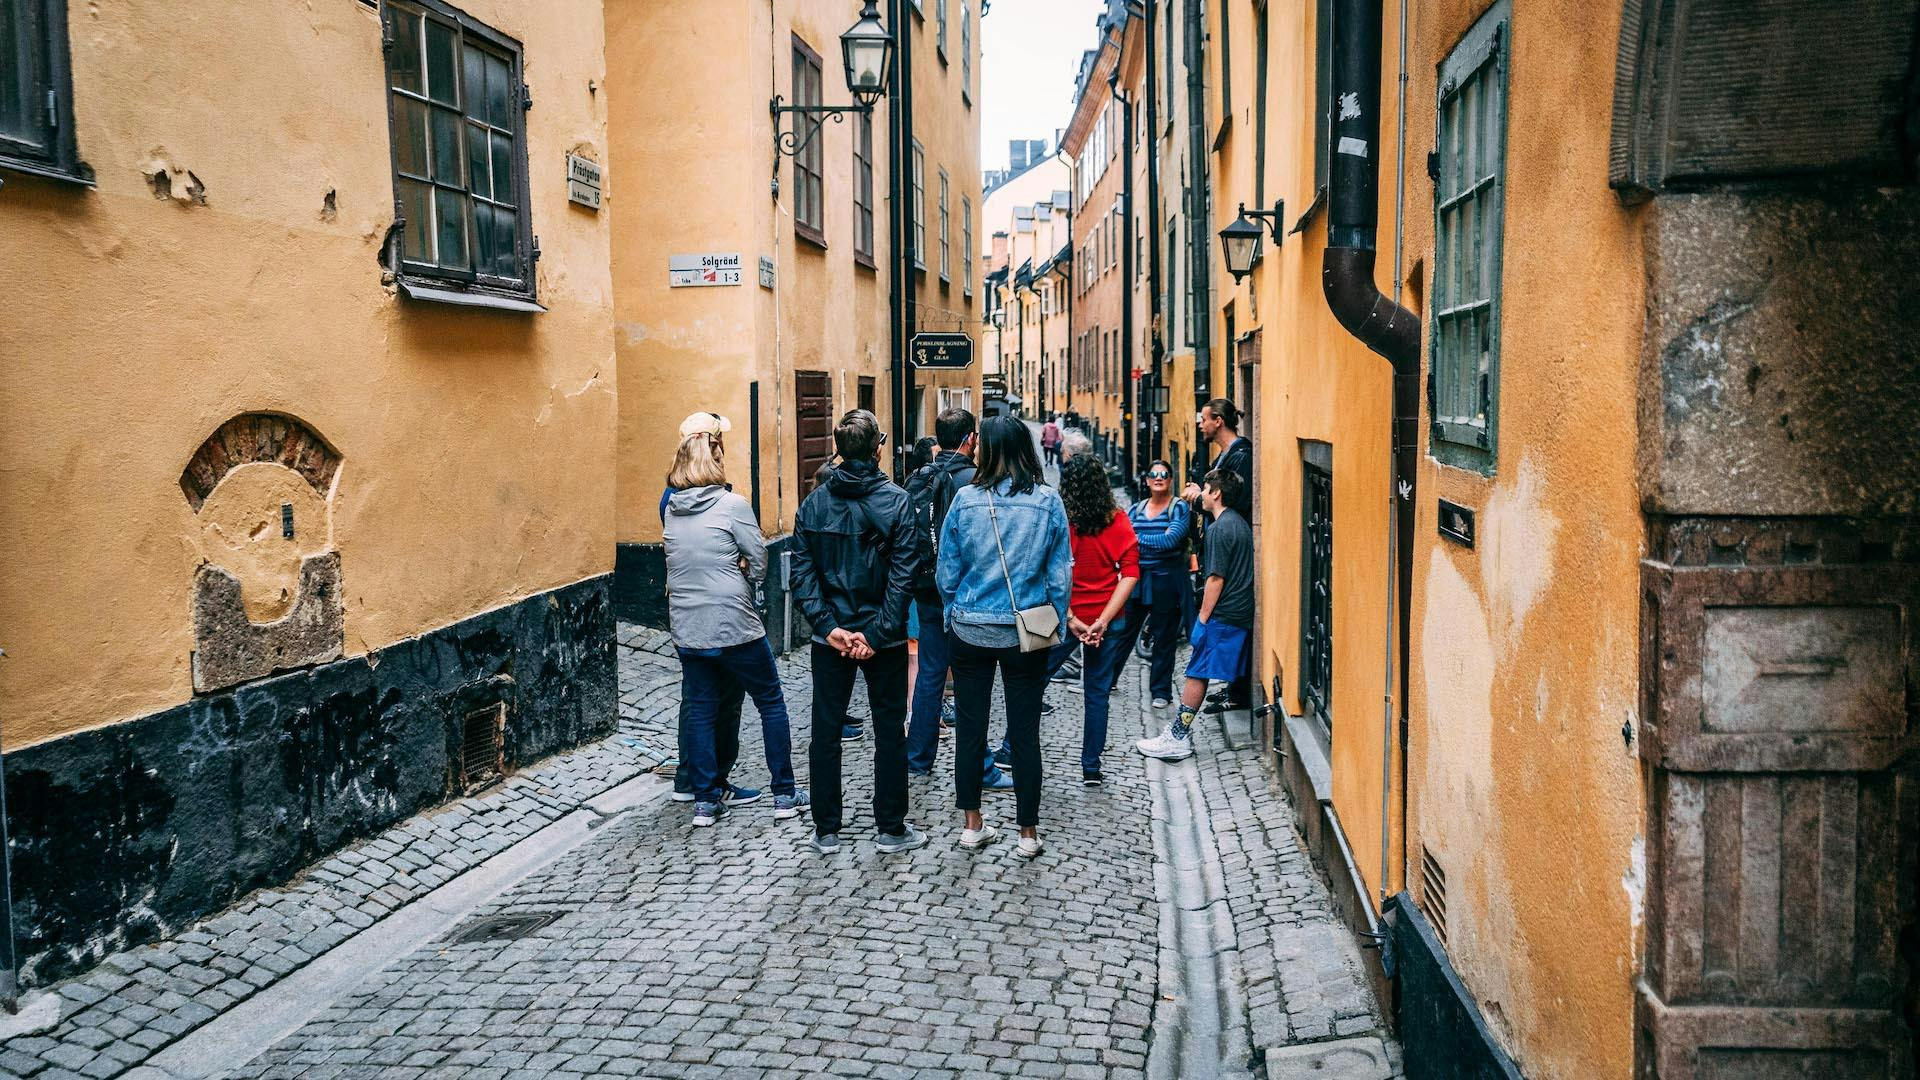 Stockholm Must Sees, Stockholm Old Town, Narrow Alley.jpg